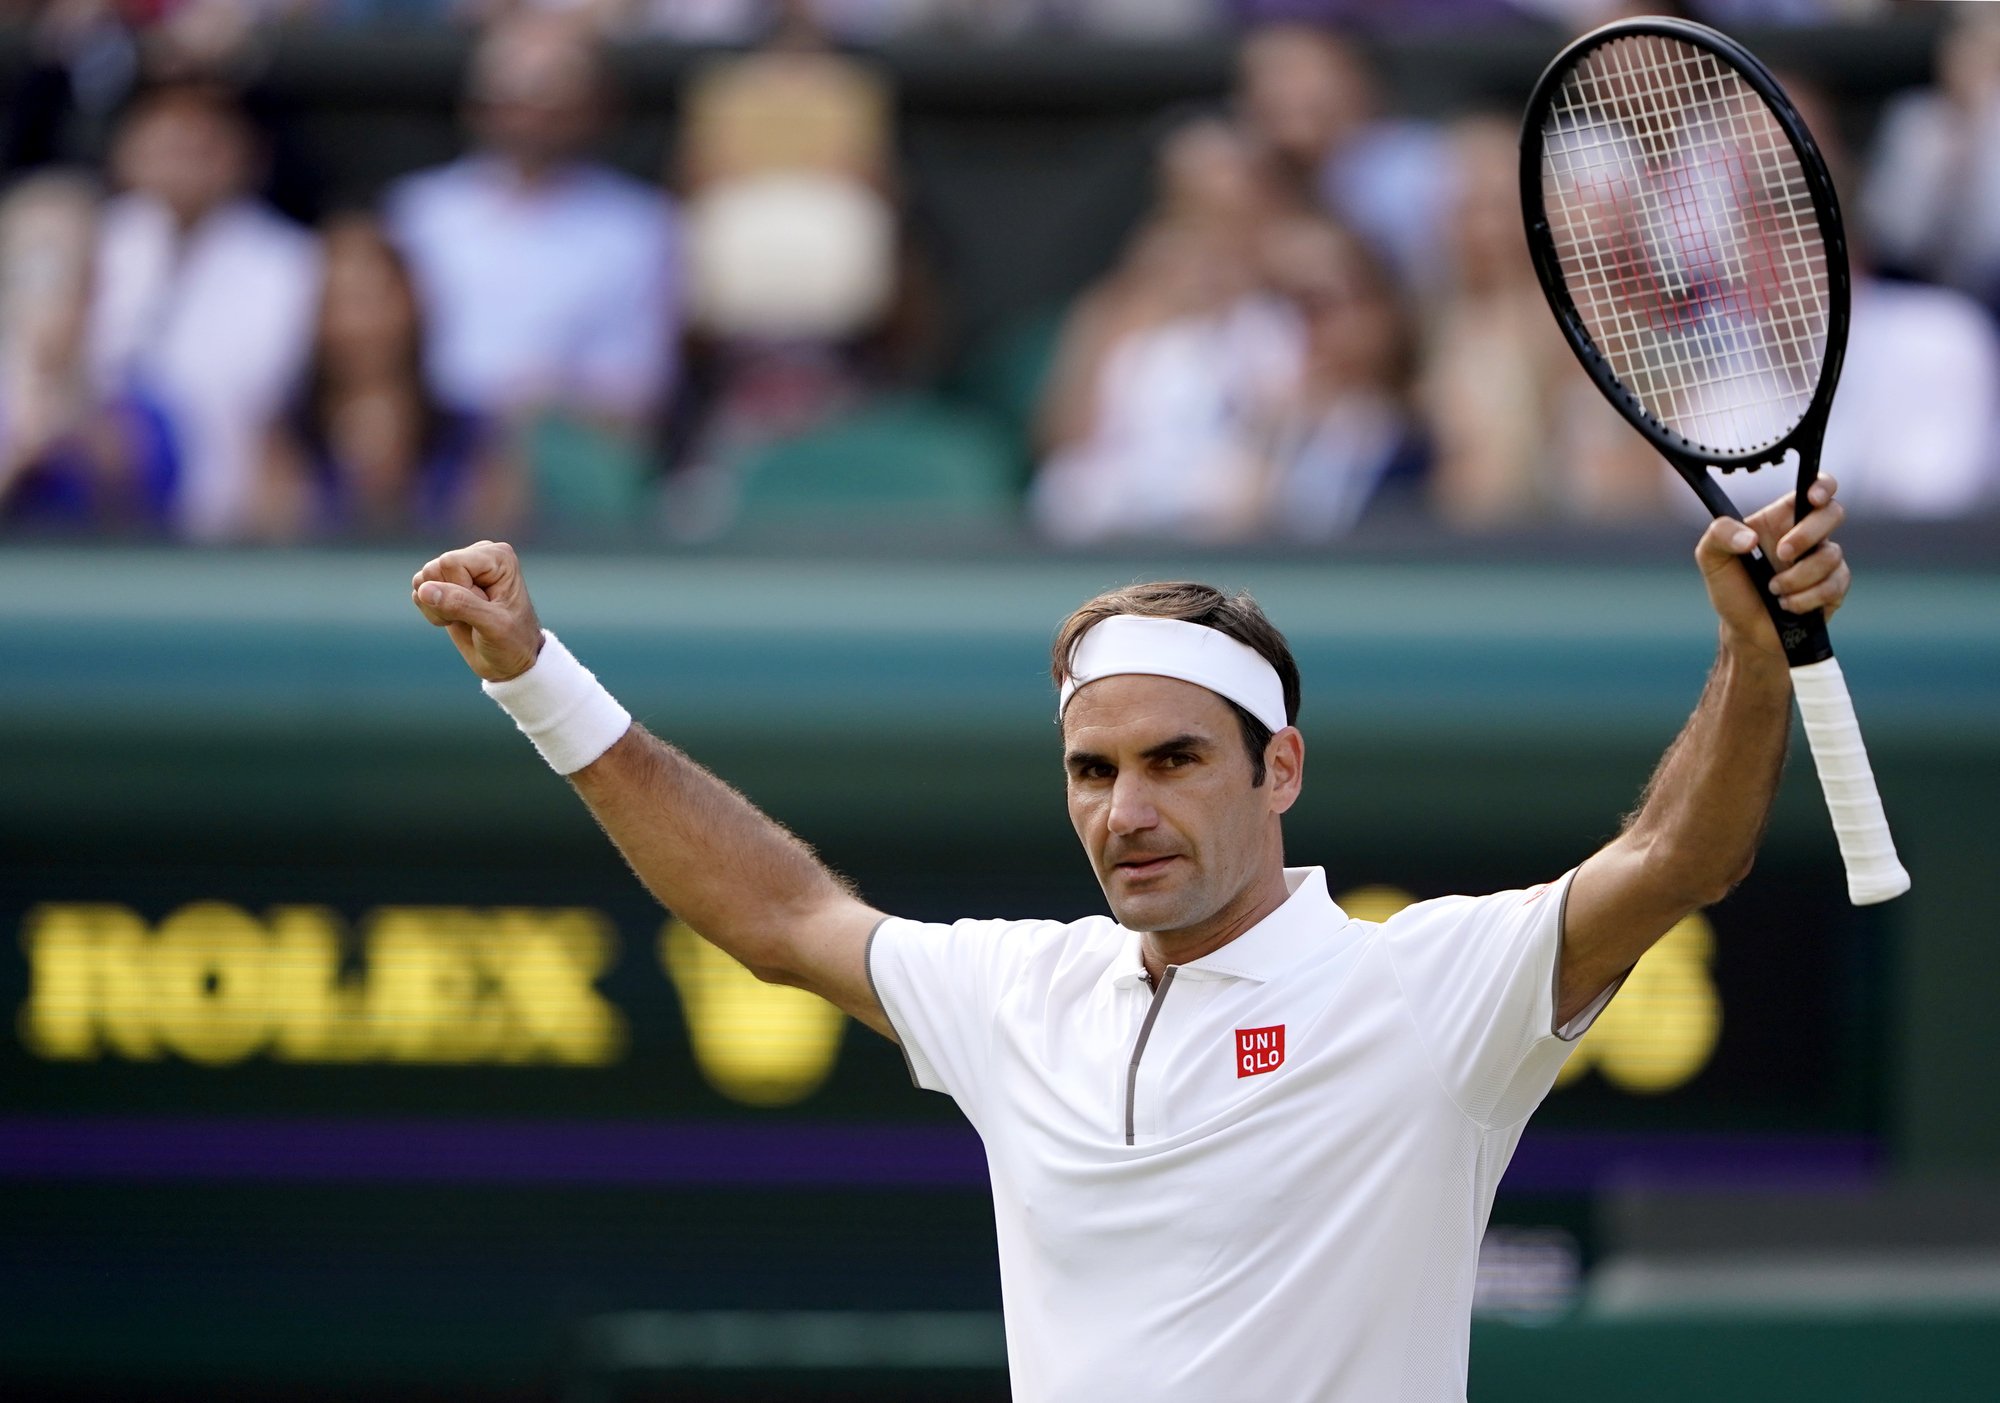 epa07708449 Roger Federer of Switzerland celebrates winning against Kei Nishikori of Japan during their quarter final match for the Wimbledon Championships at the All England Lawn Tennis Club, in London, Britain, 10 July 2019. EPA/NIC BOTHMA EDITORIAL USE ONLY/NO COMMERCIAL SALES